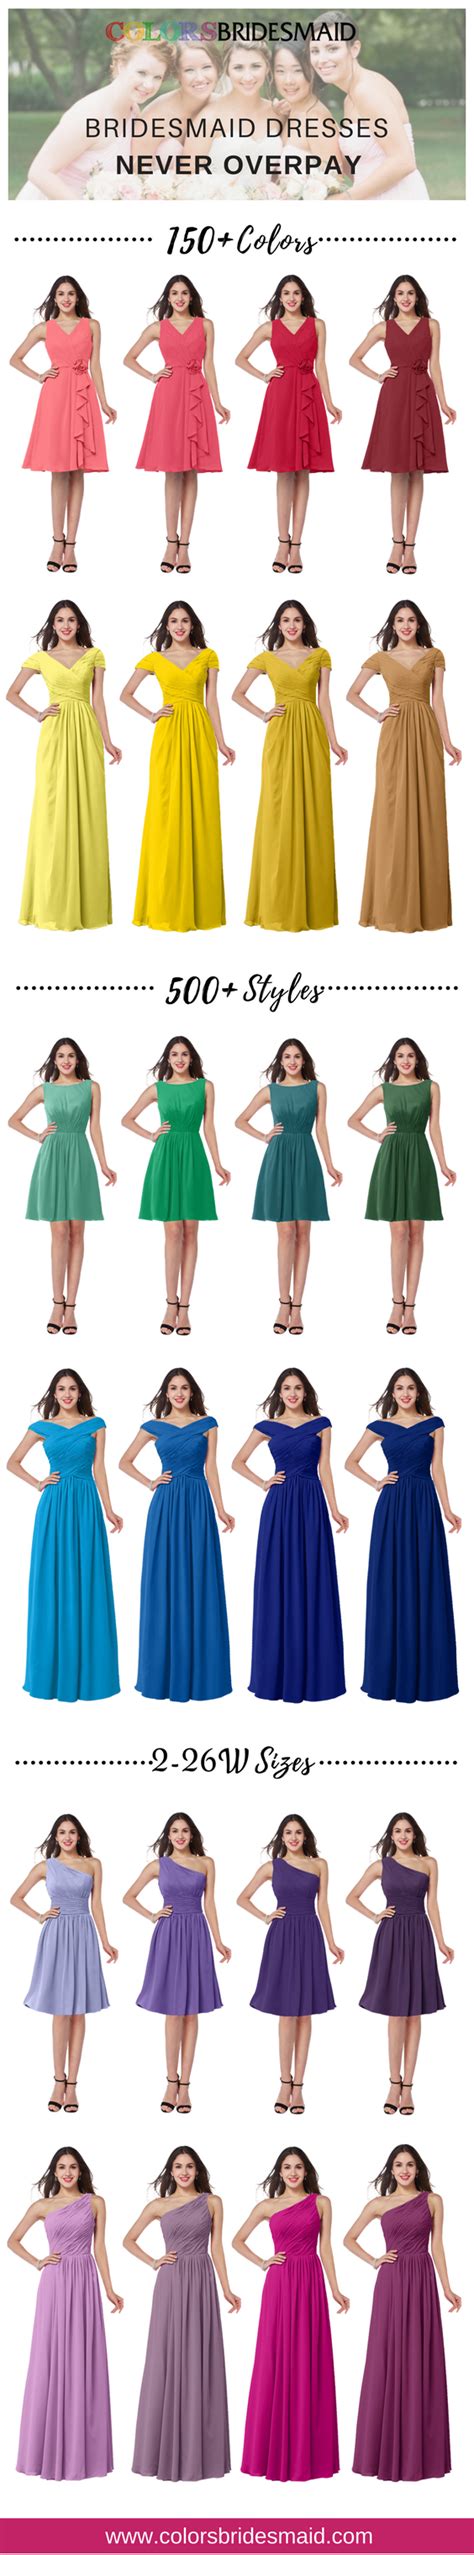 Are Colors Bridesmaid Dresses True To Size? – SizeChartly